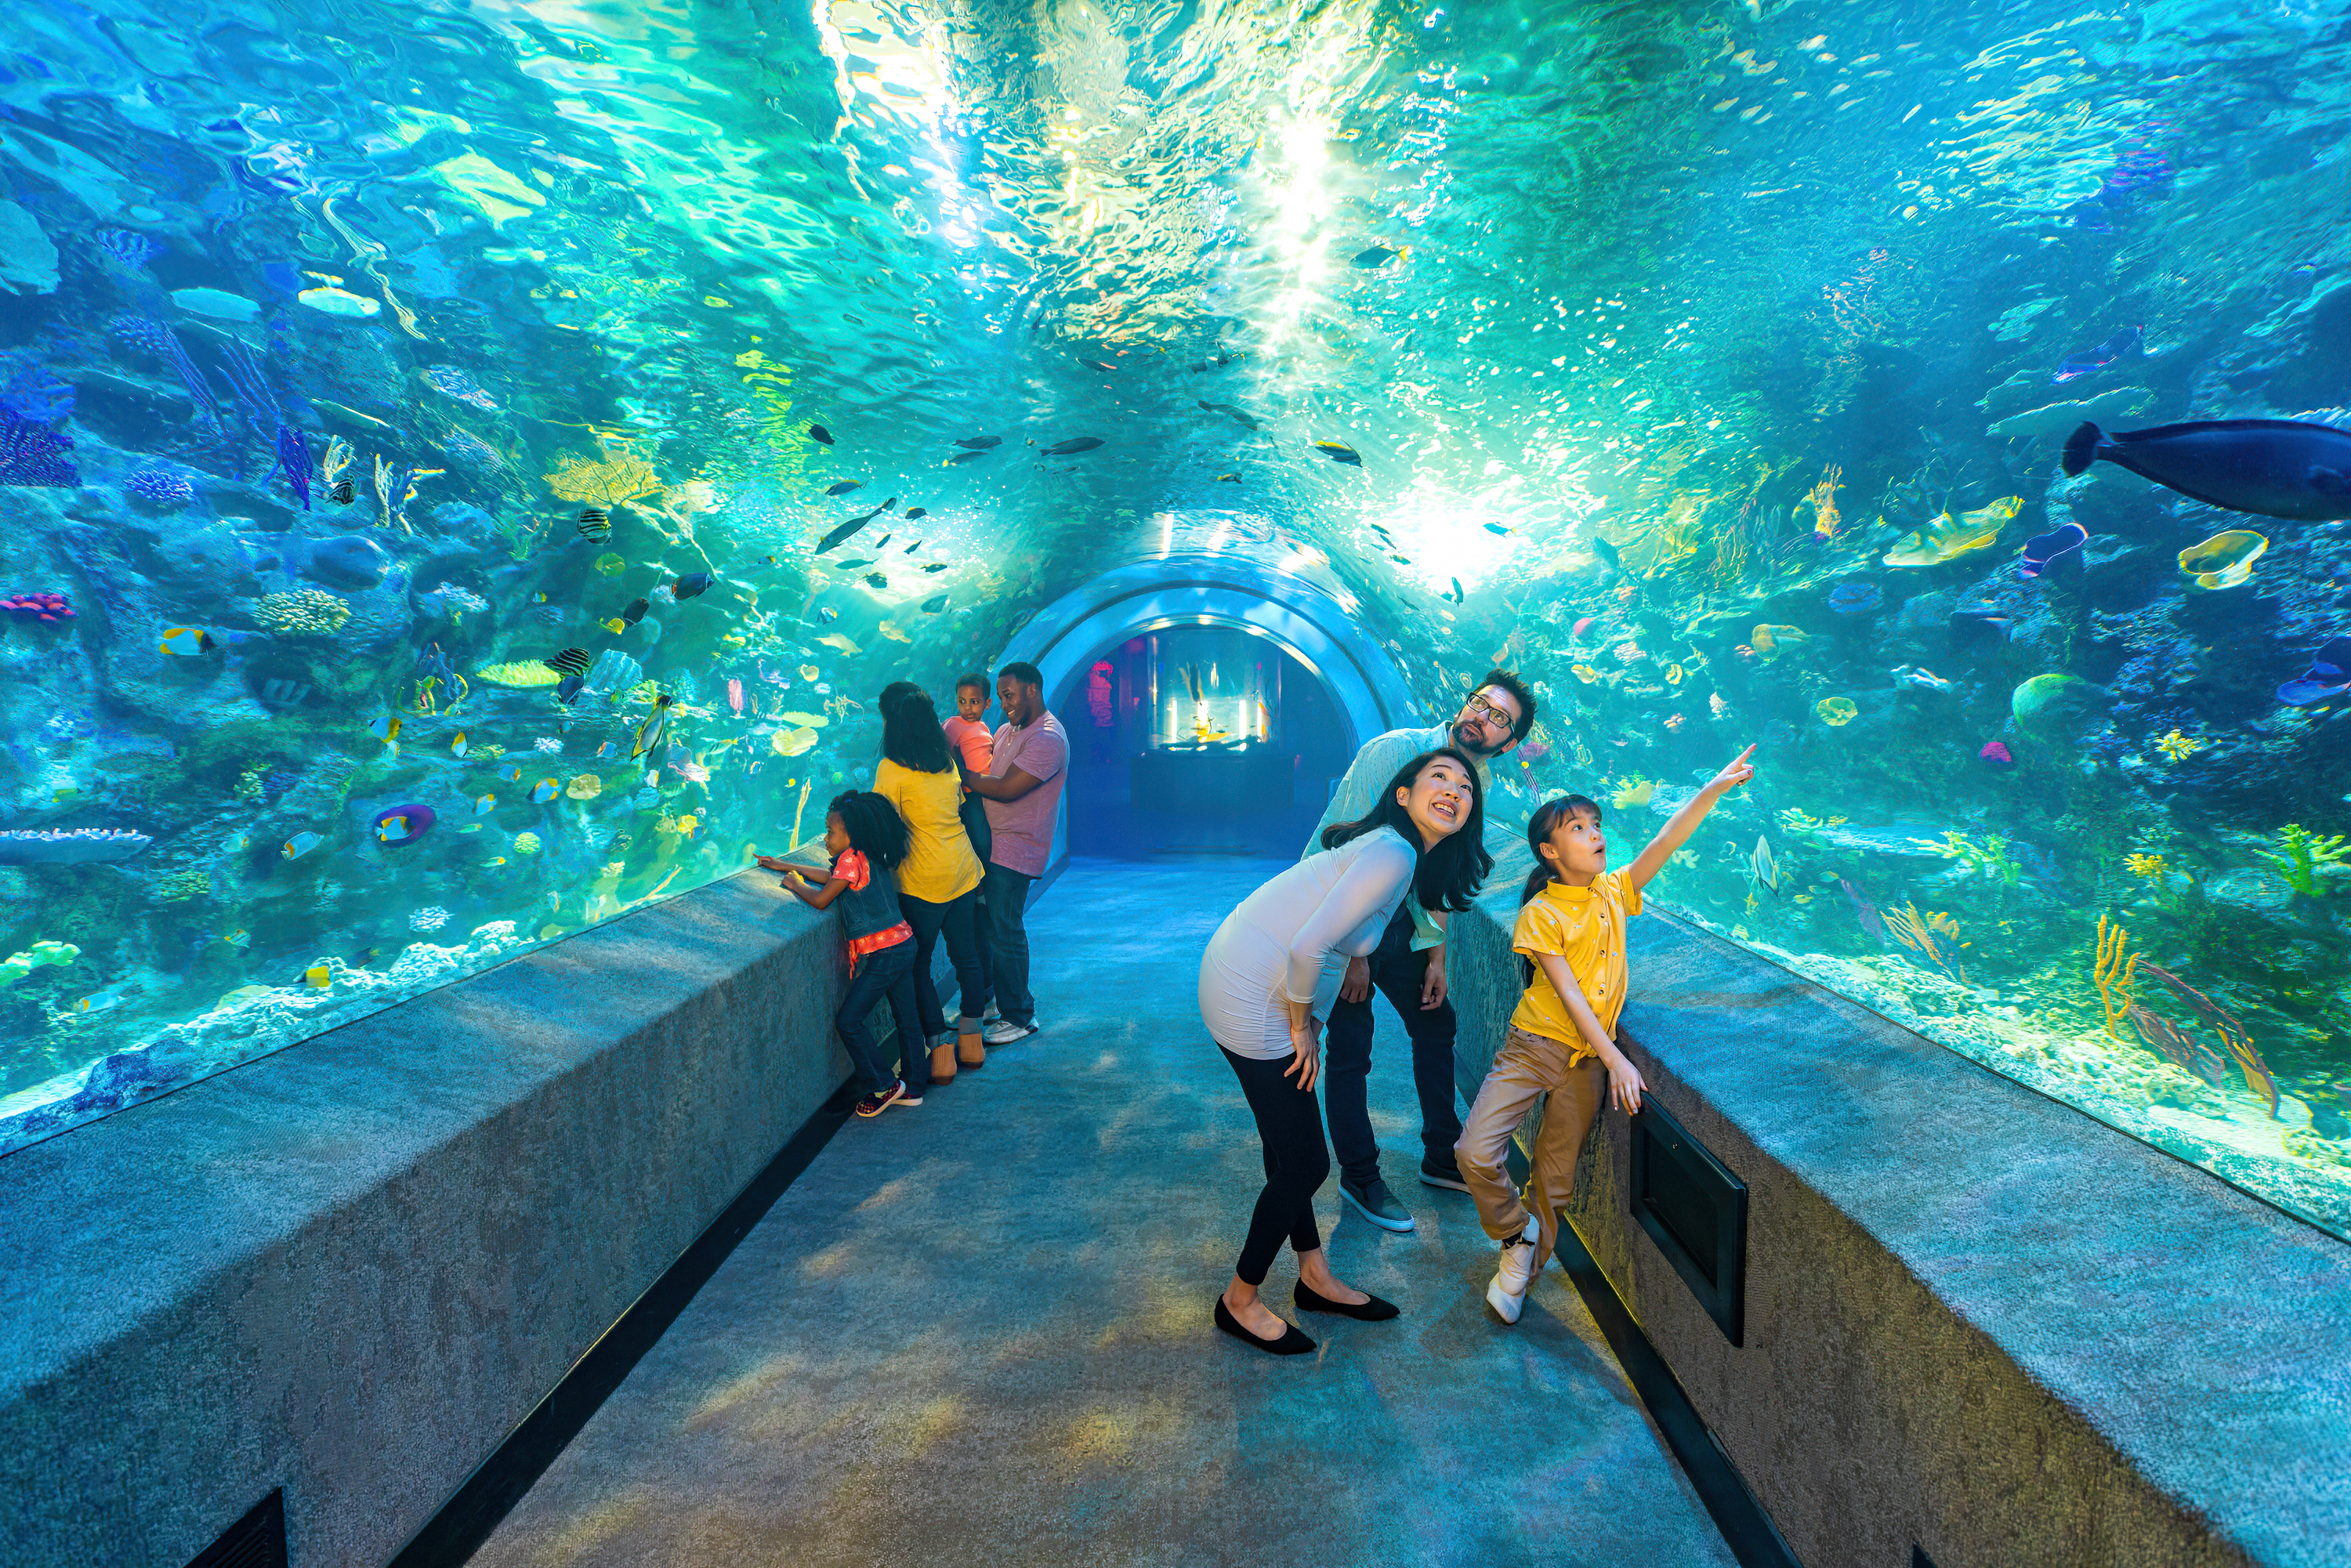 Aquarium visitors in an underwater tunnel looking at fishes